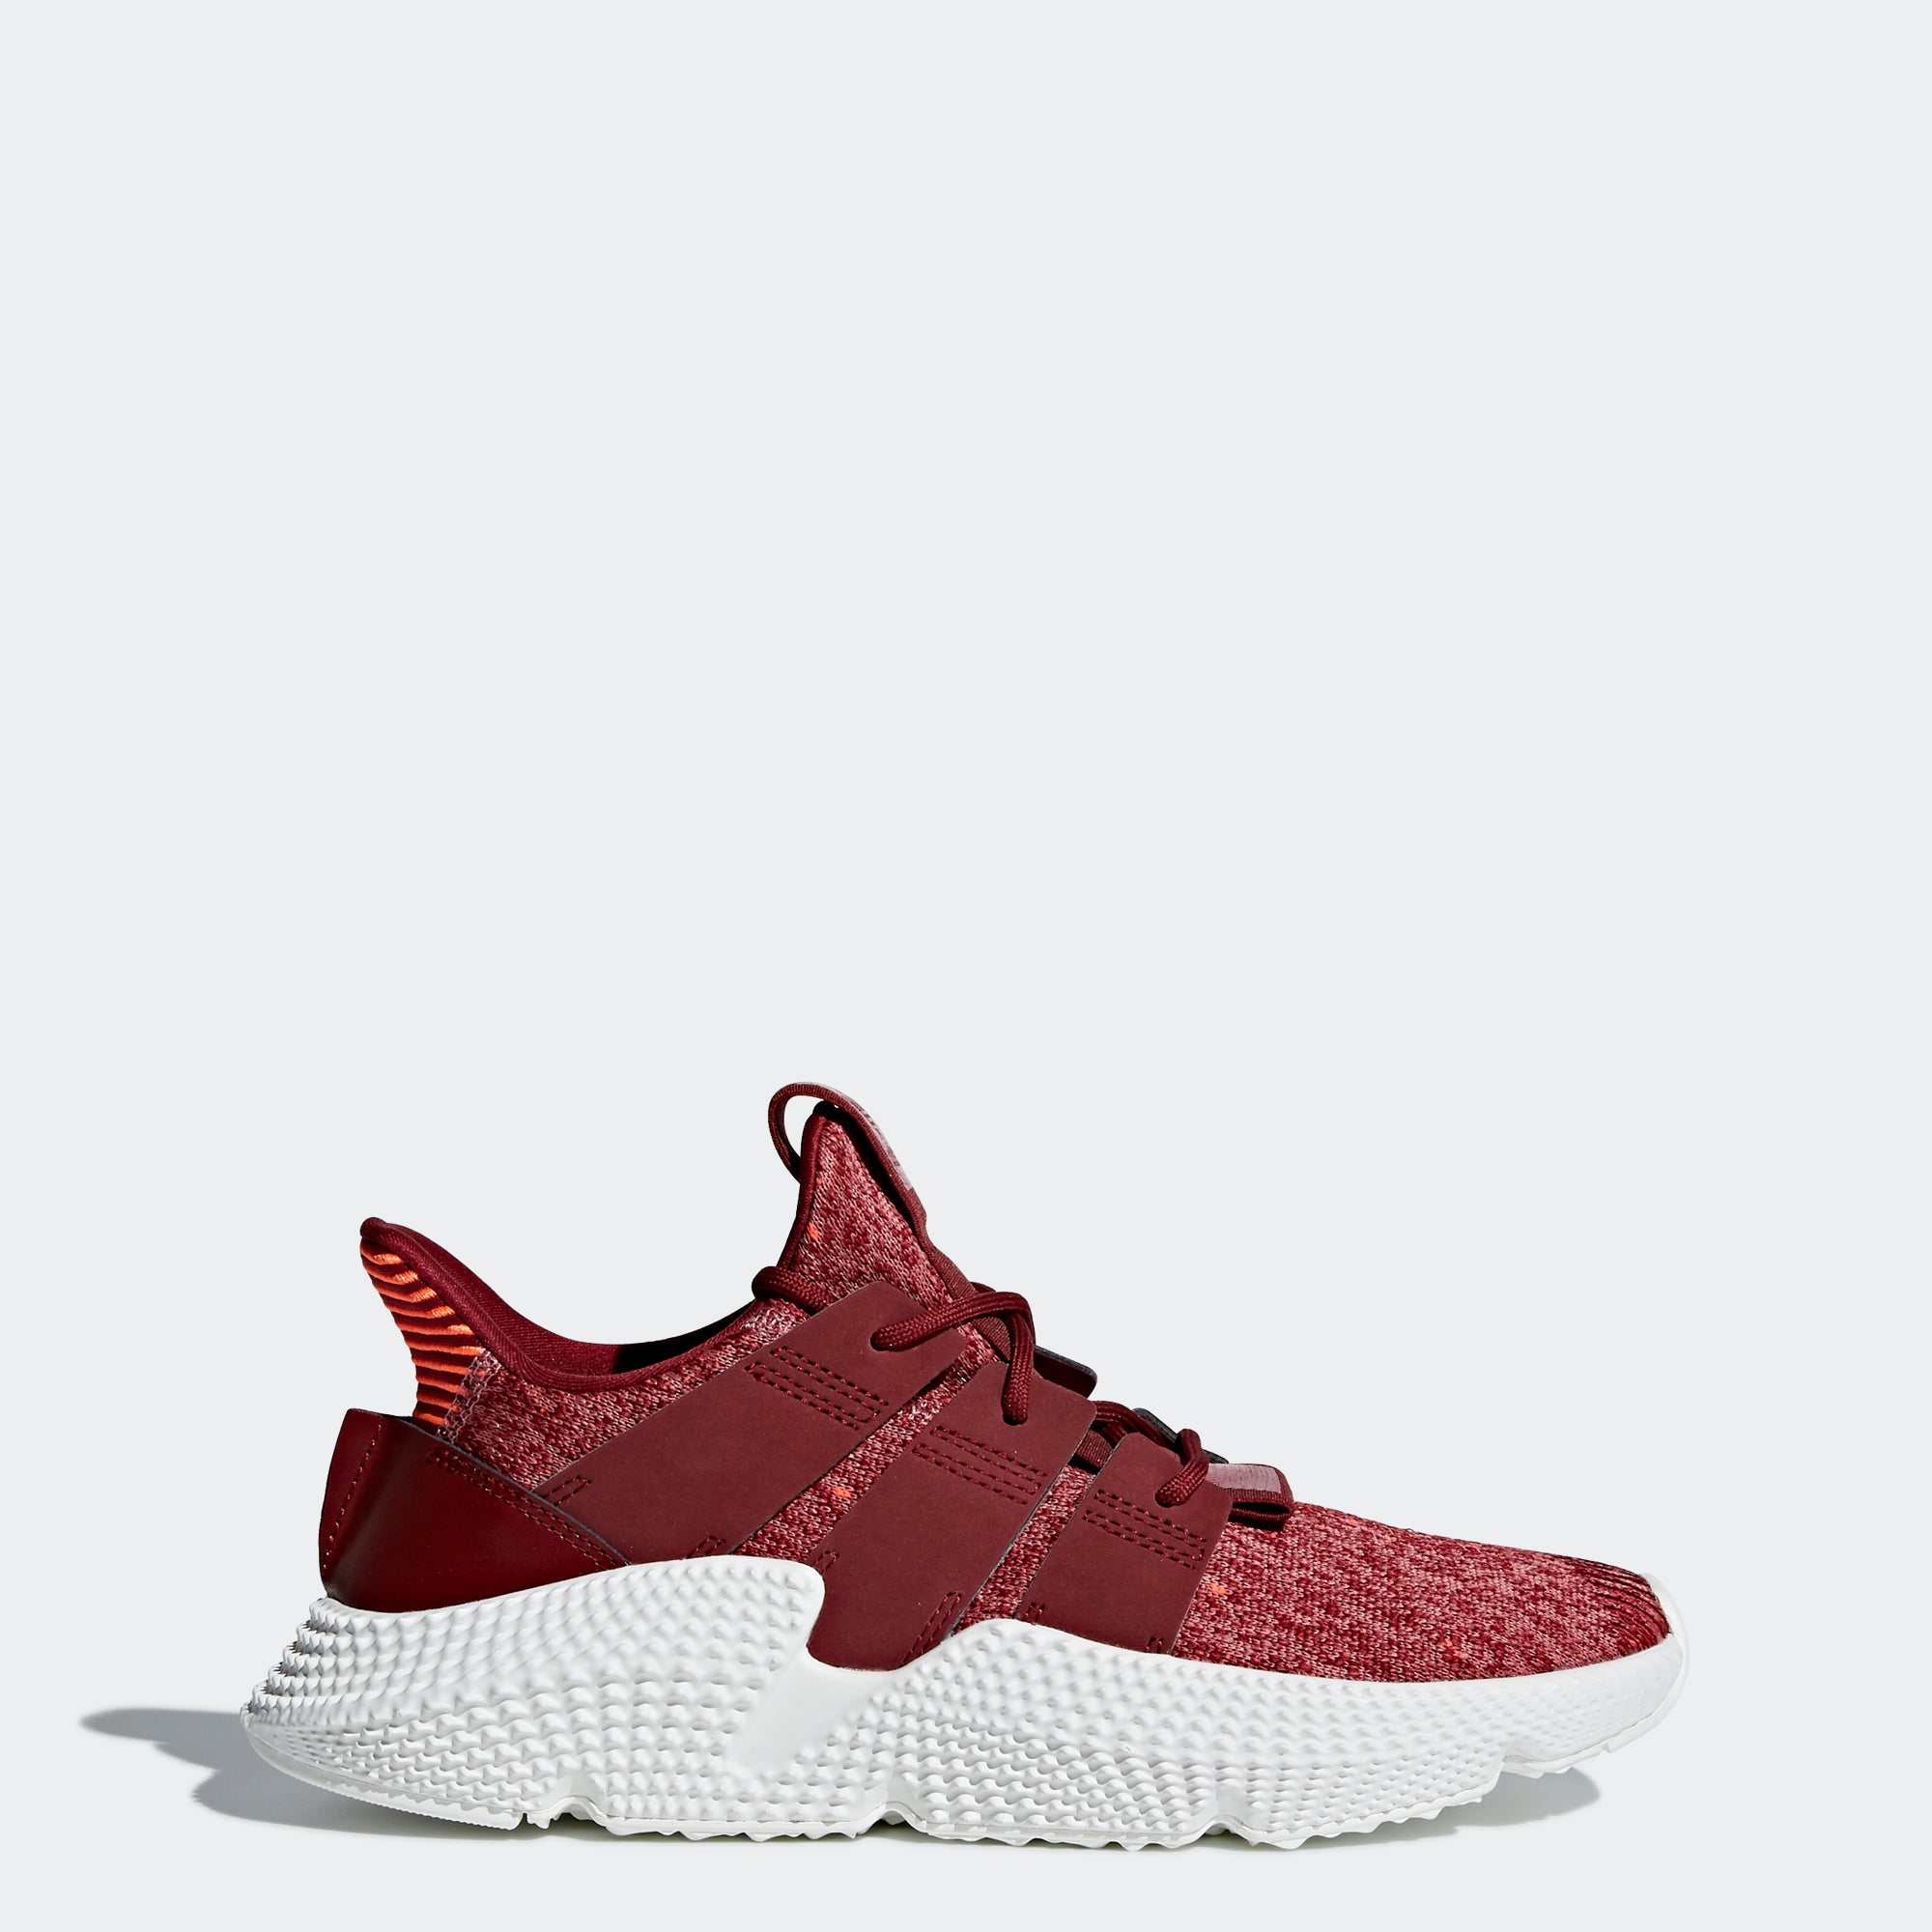 adidas prophere shoes